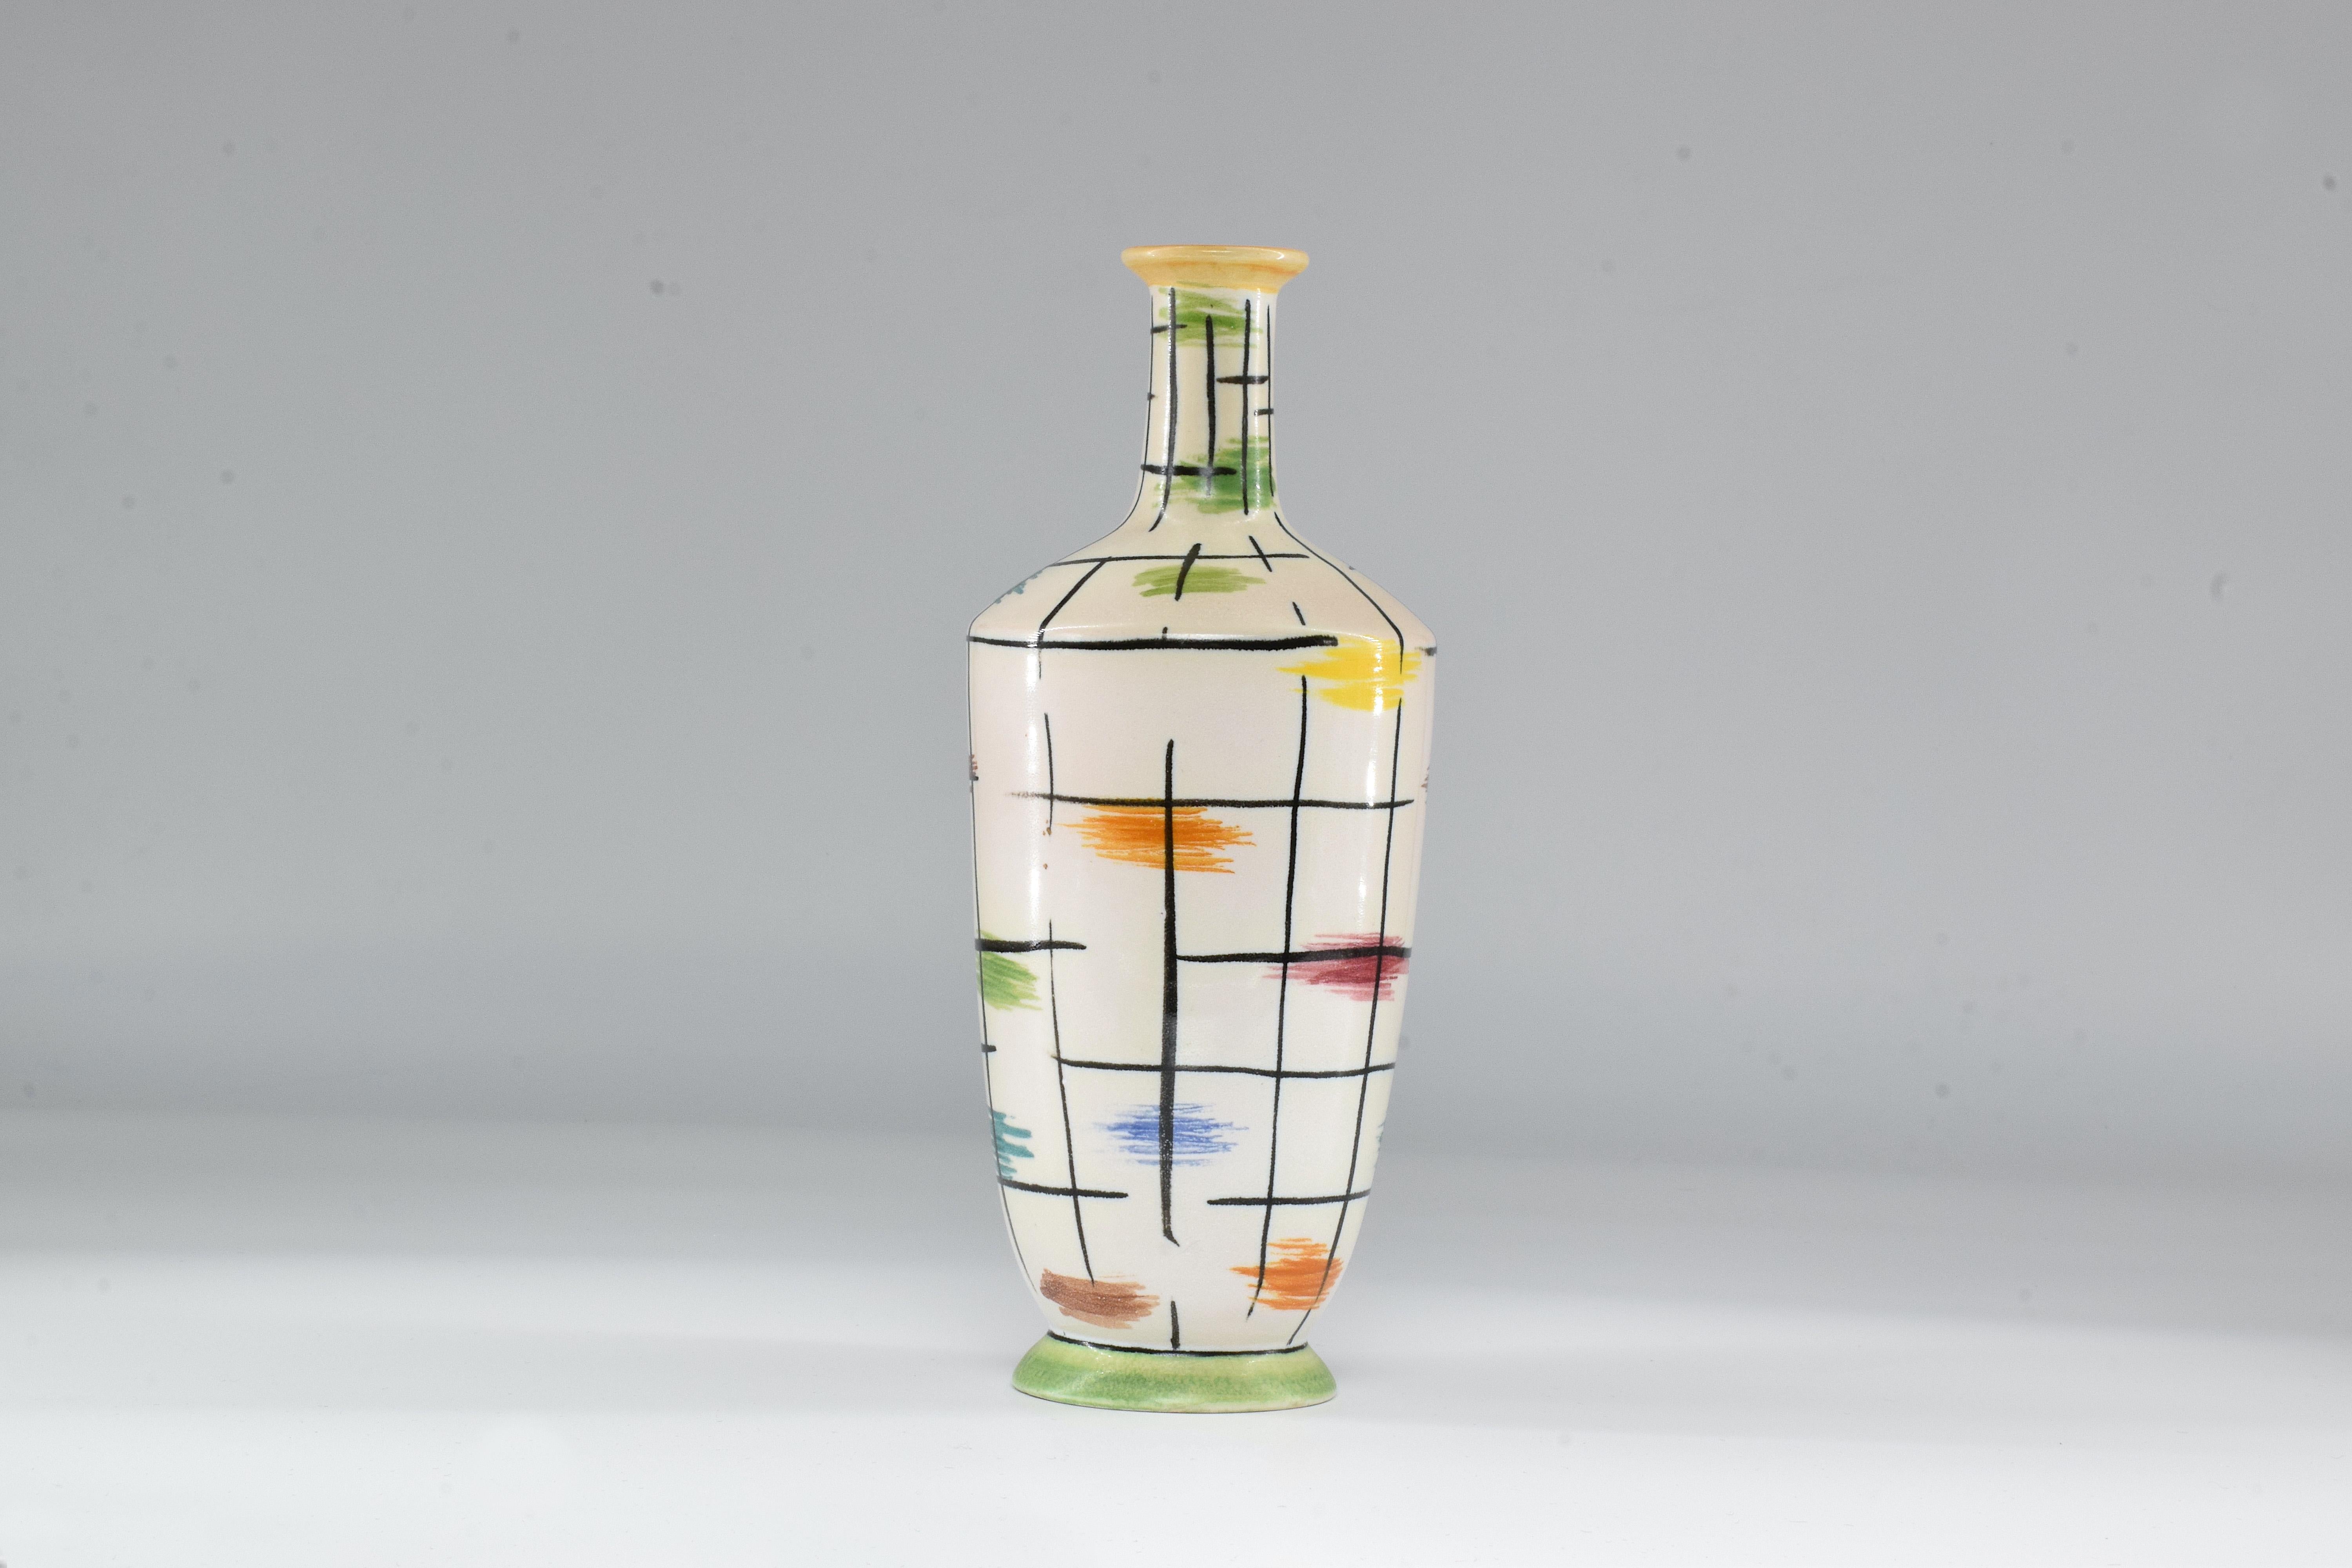 This decorative ceramic vase is an original art piece by Italian designer Pucci Umbertide, known for mixing colors in a midcentury spirit with hand painted patterns. A great fit to lighten up any living area.

We are an exhibition space and an